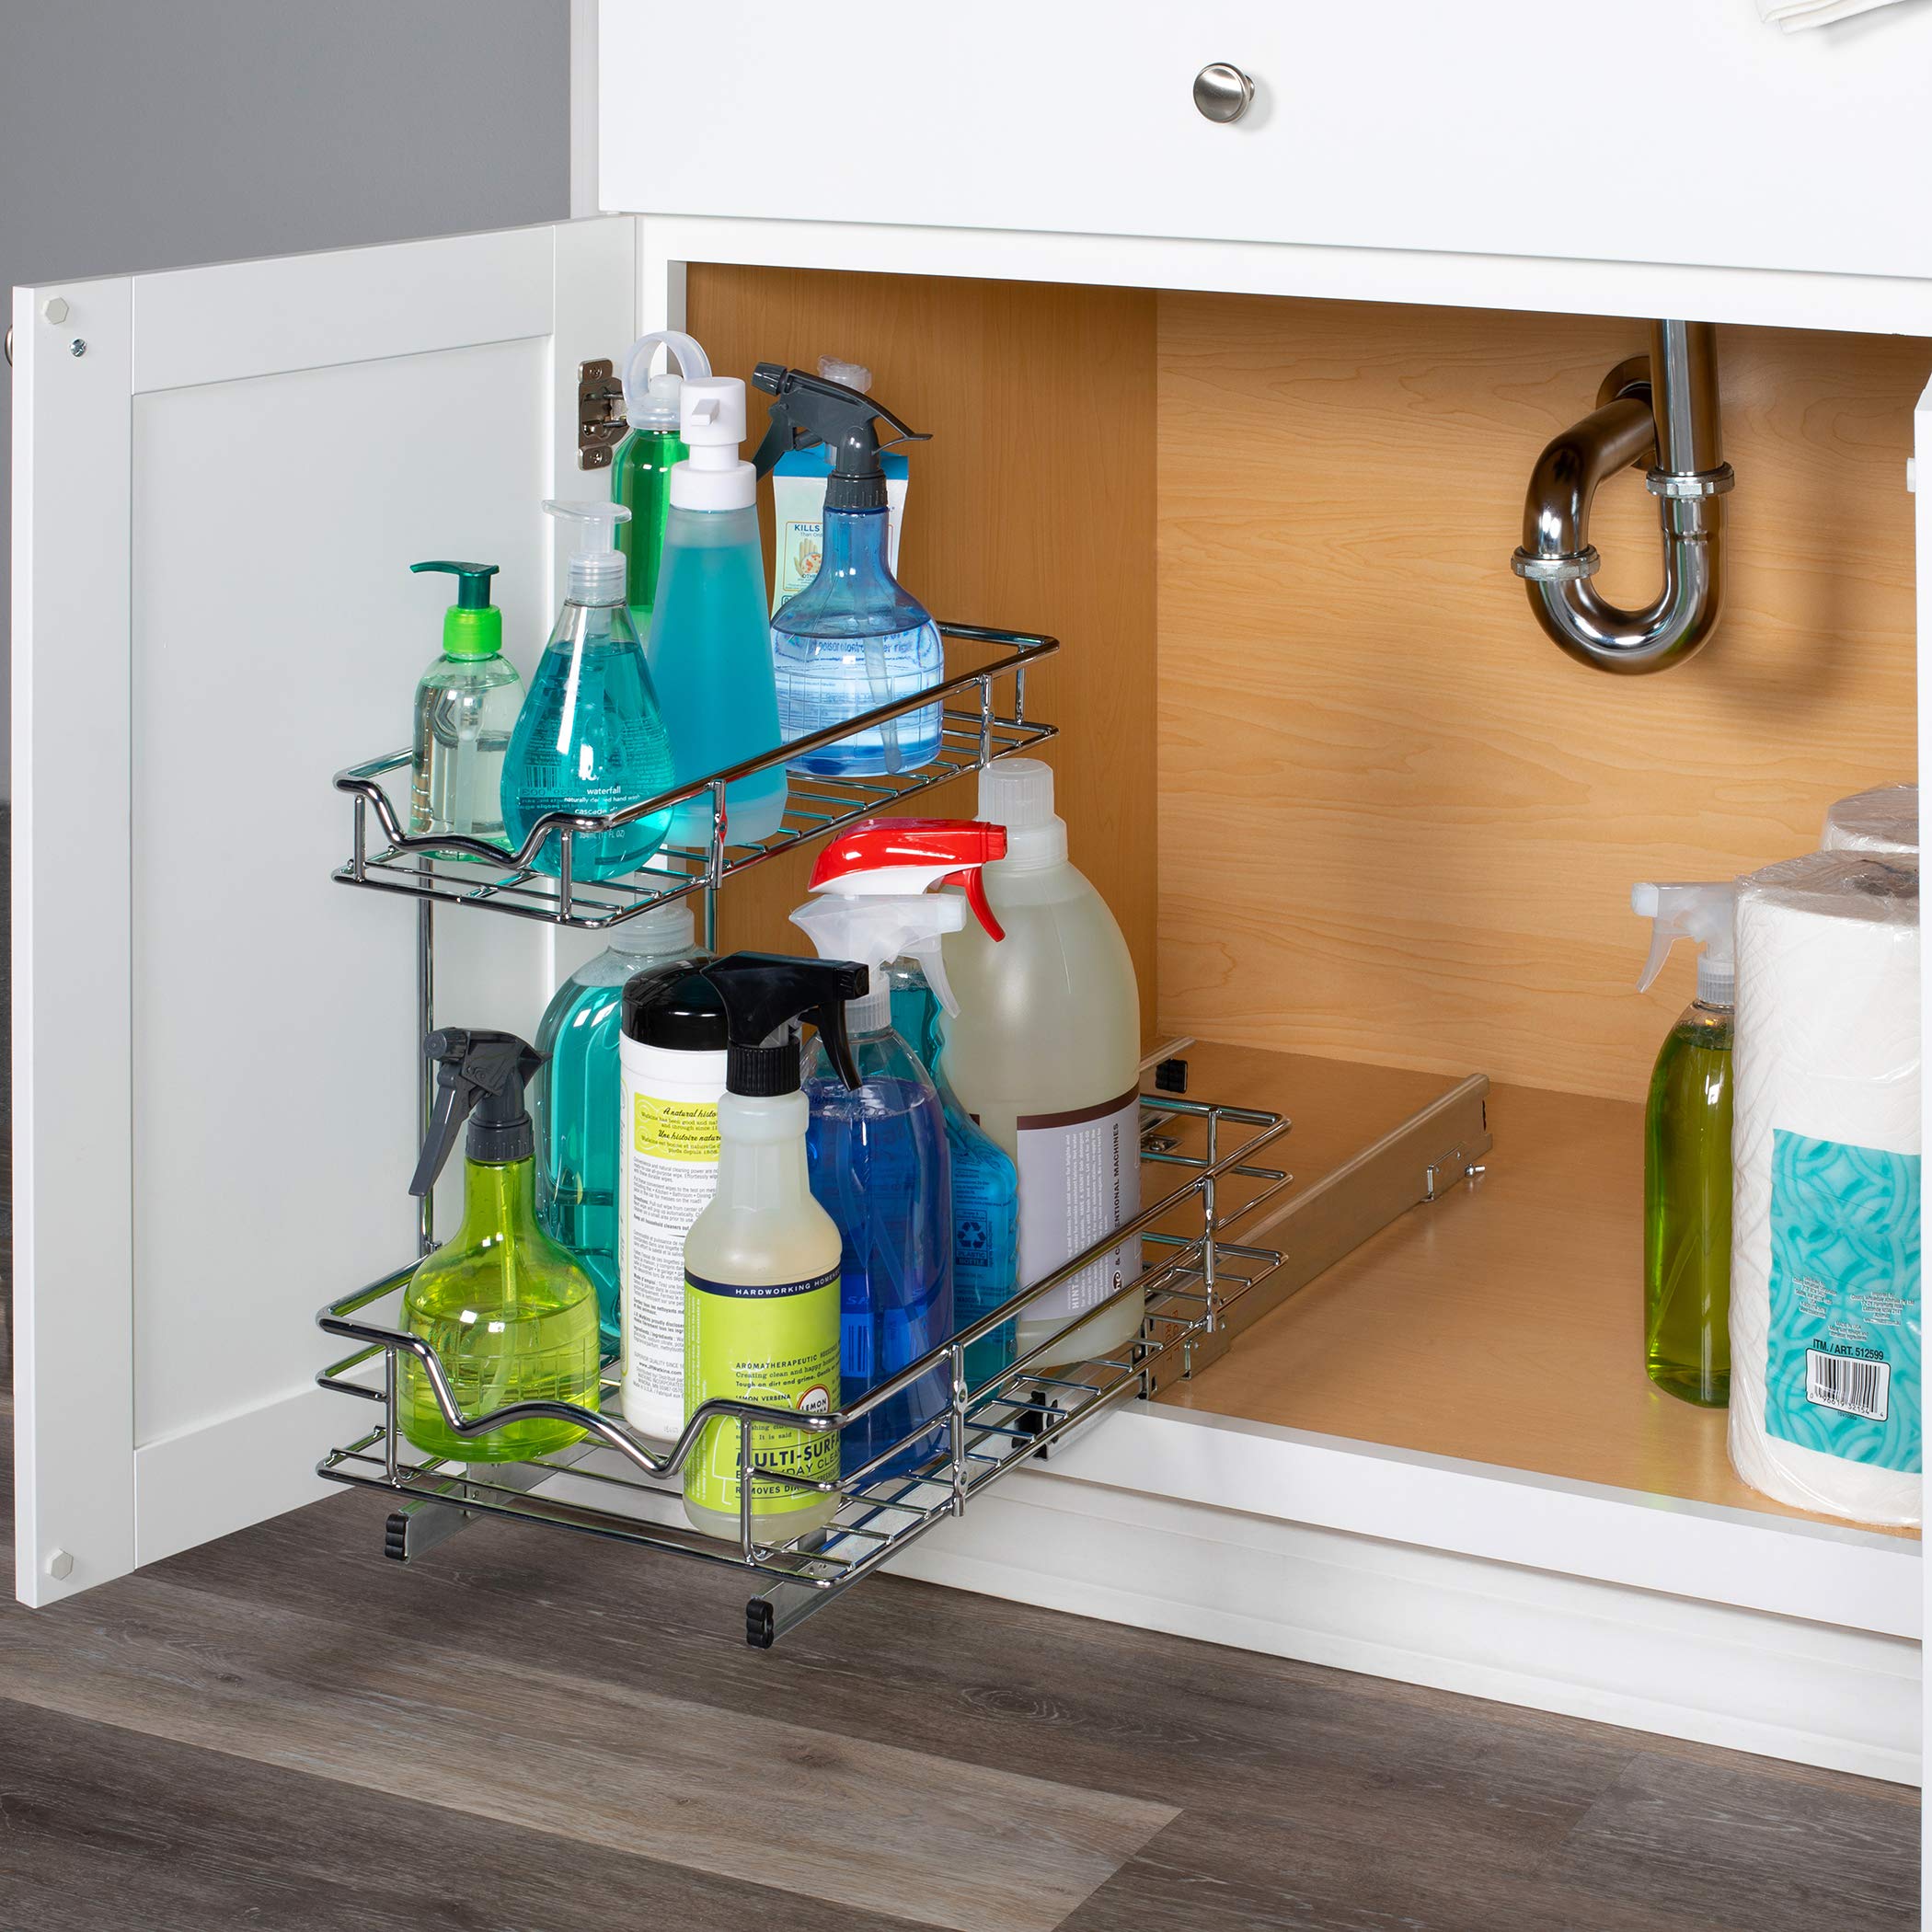 Hold N’ Storage Under Sink Organizers and Storage - 2 Tier slide out Cabinet Organizer With Sliding Drawers For Inside Cabinets Chrome